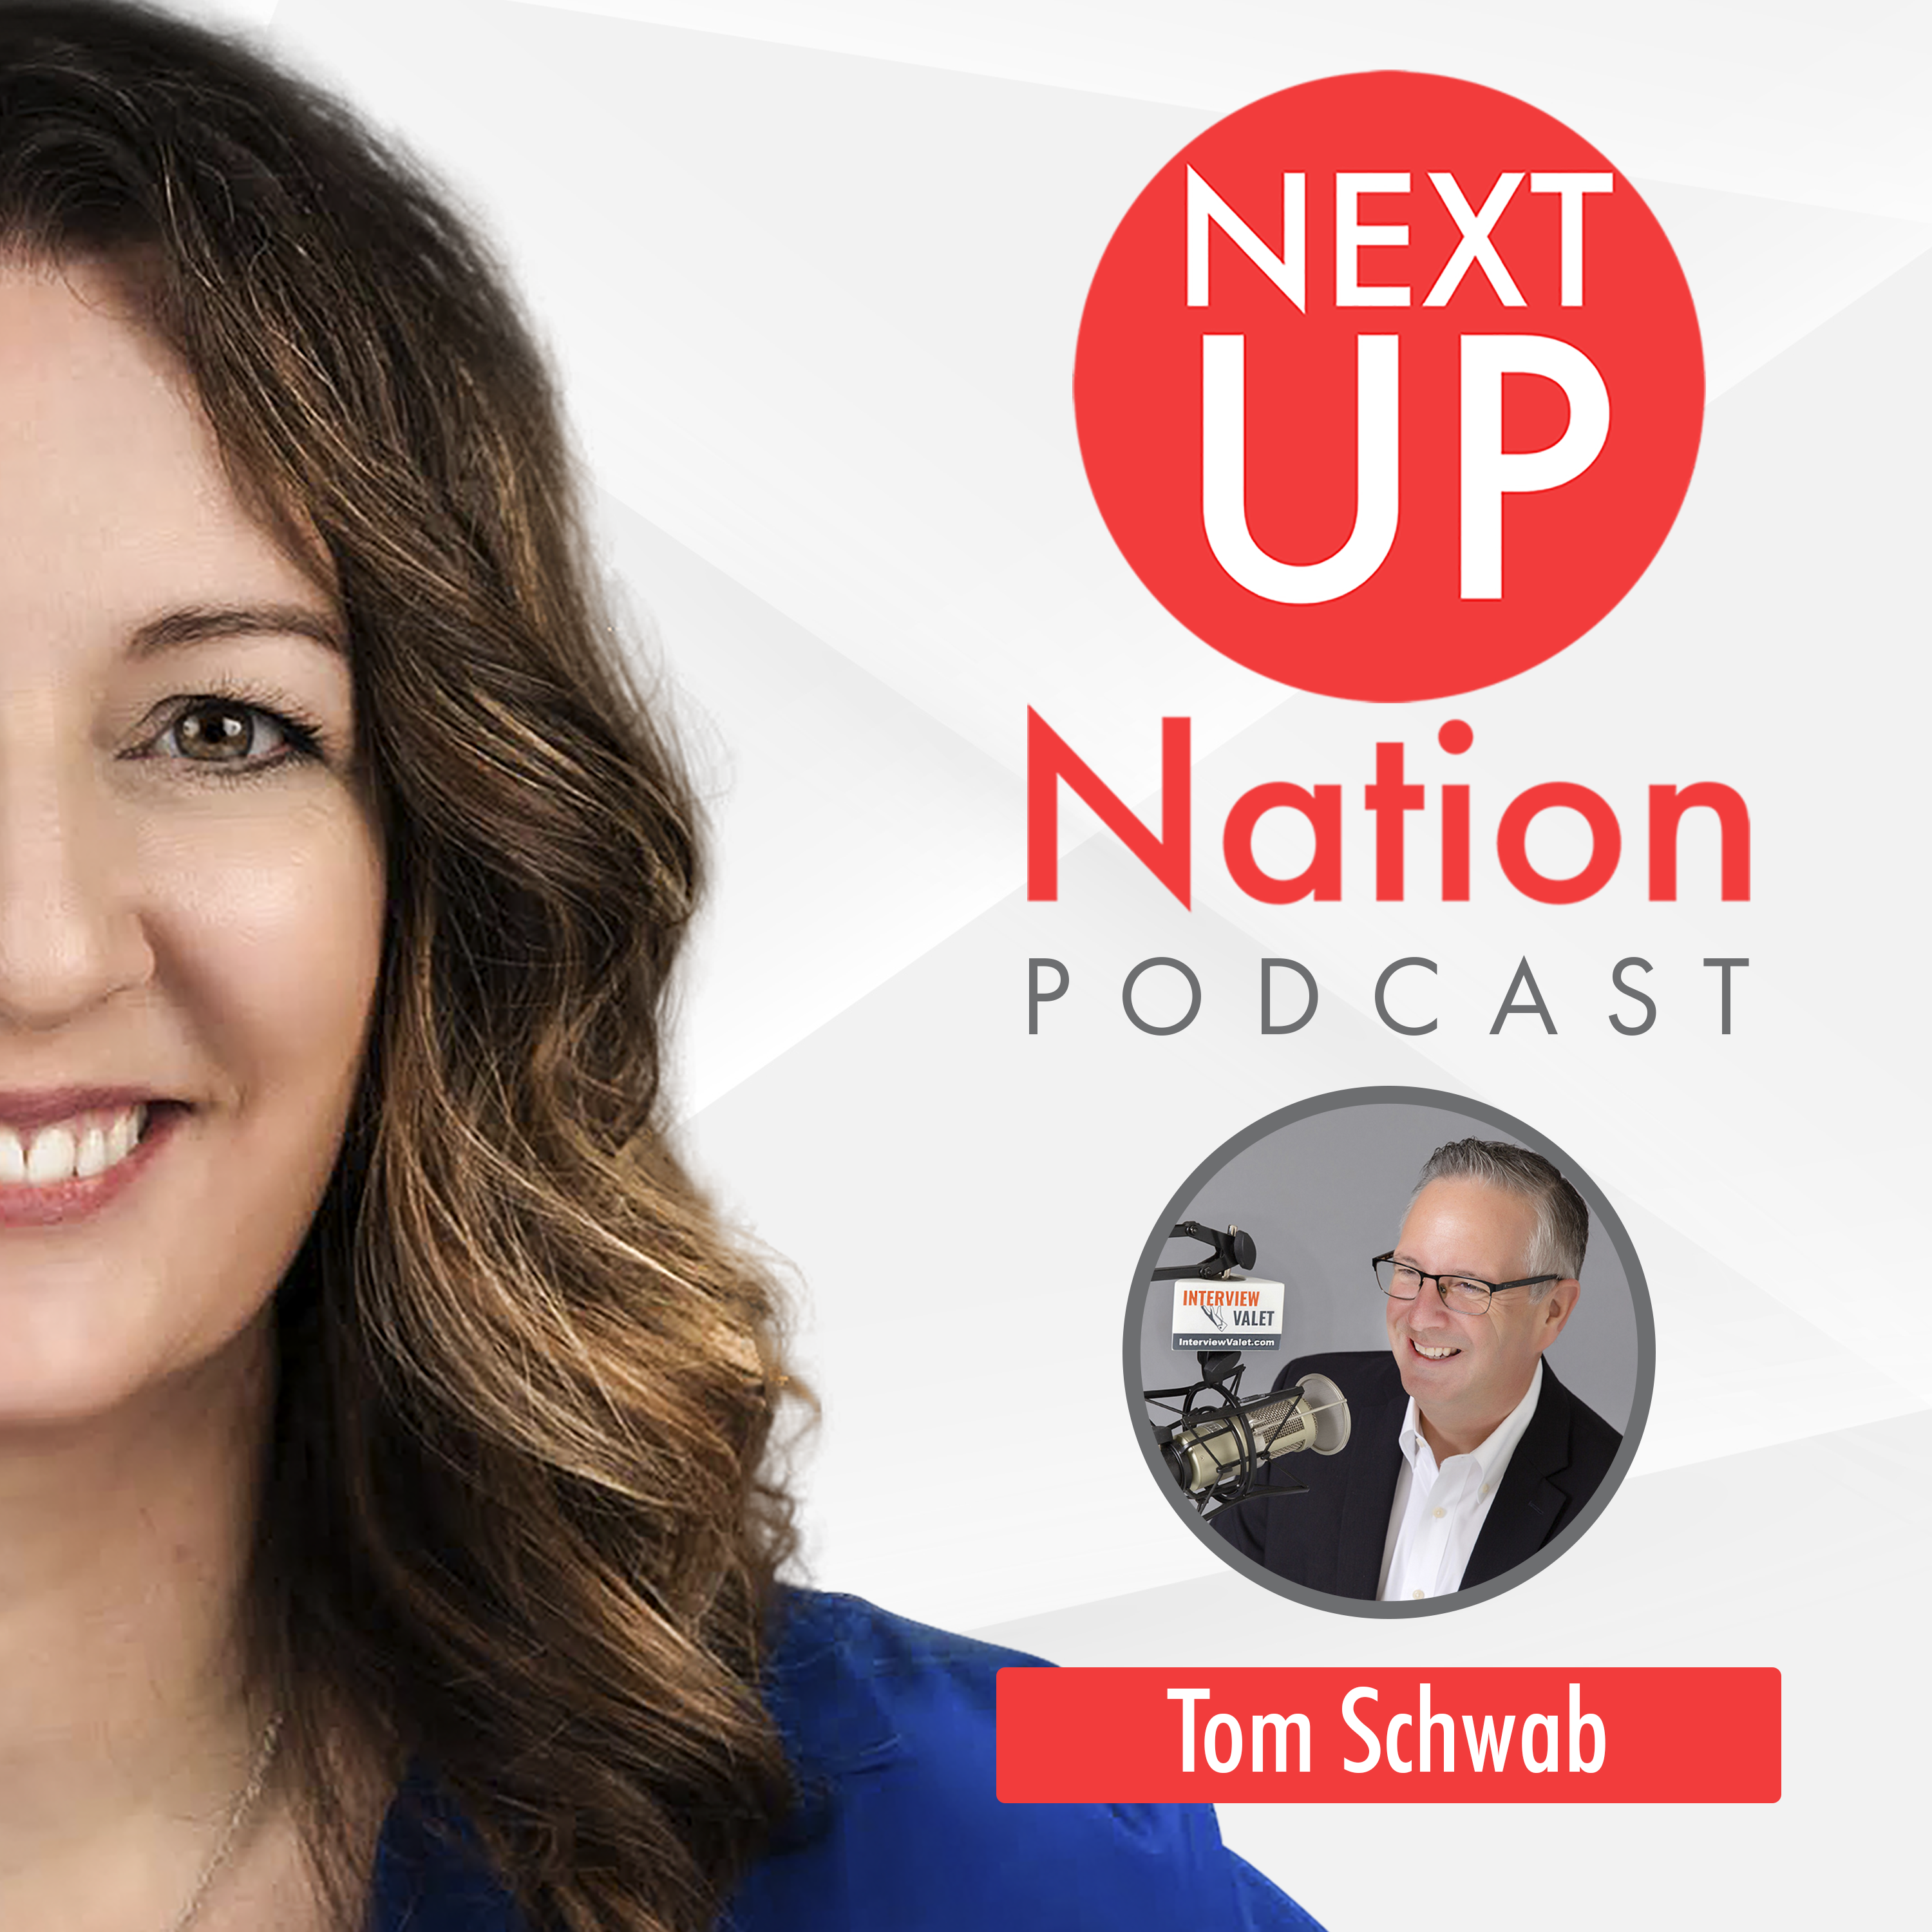 Cash in on Other People's Podcasts - Interview with Tom Schwab